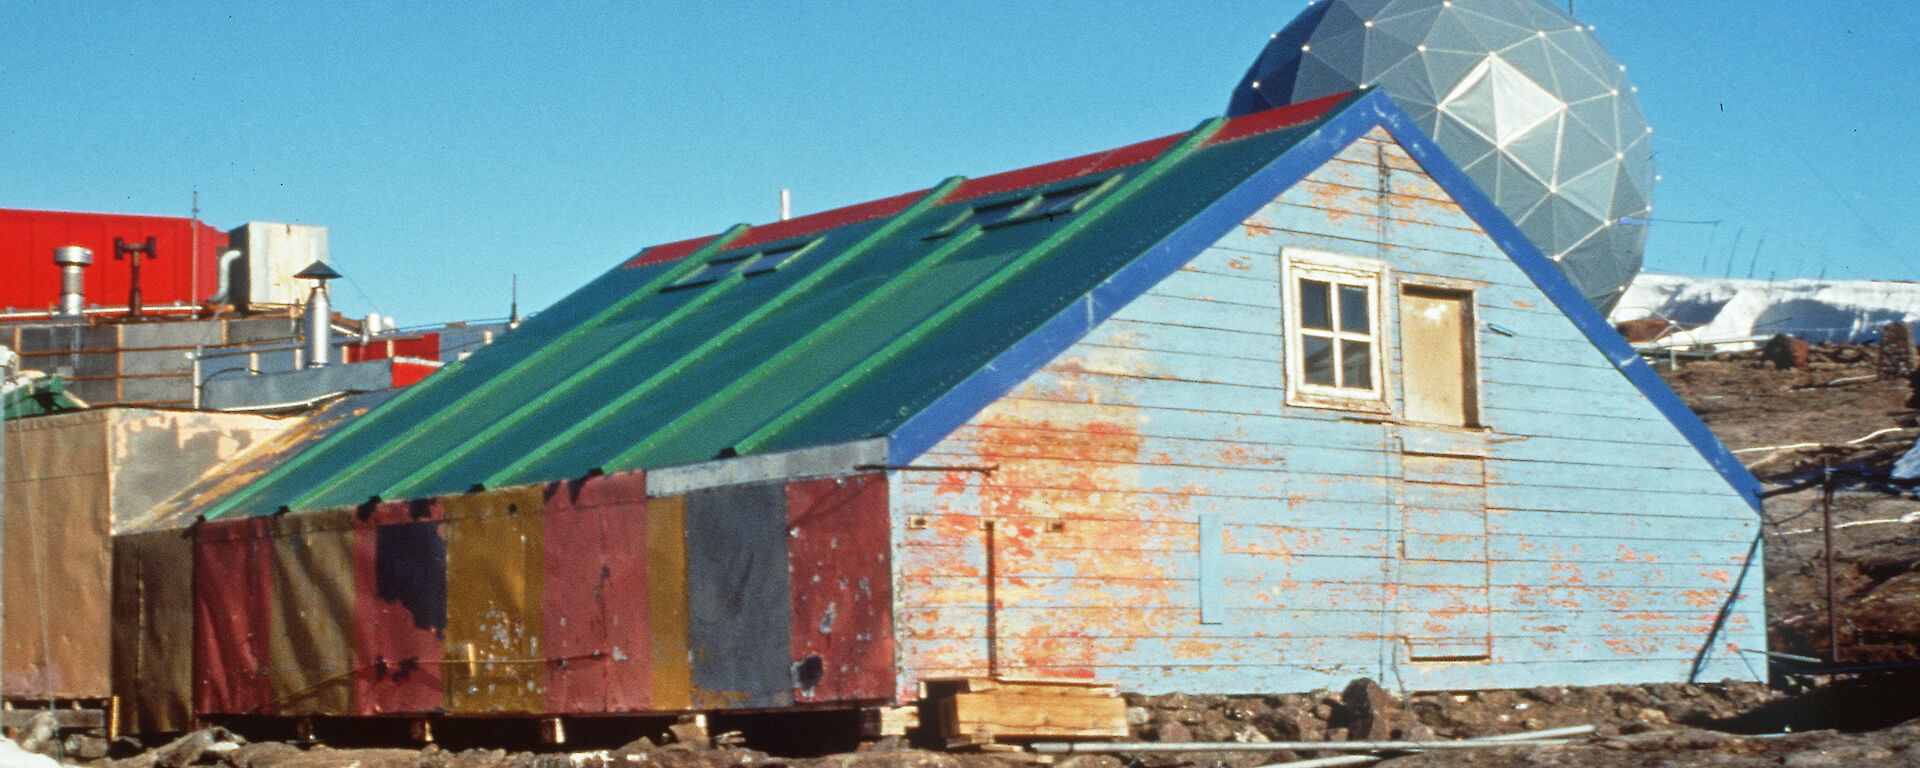 The weathered and colourful hut exterior in 1997.